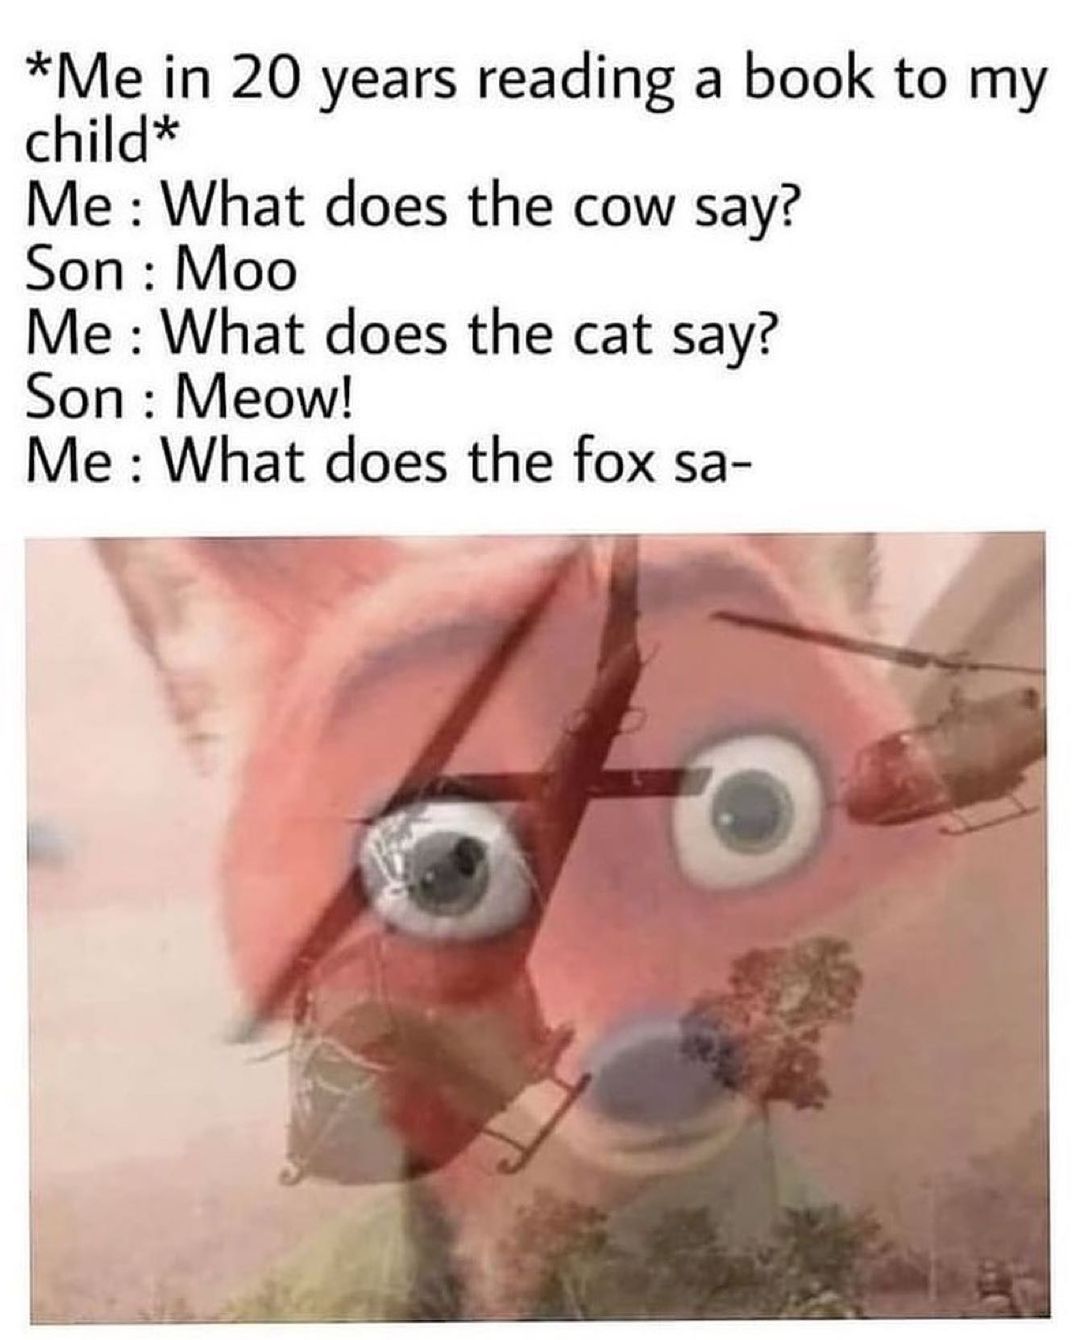 funny memes - Meme - Me in 20 years reading a book to my child Me What does the cow say? Son Moo Me What does the cat say? Son Meow! Me What does the fox sa